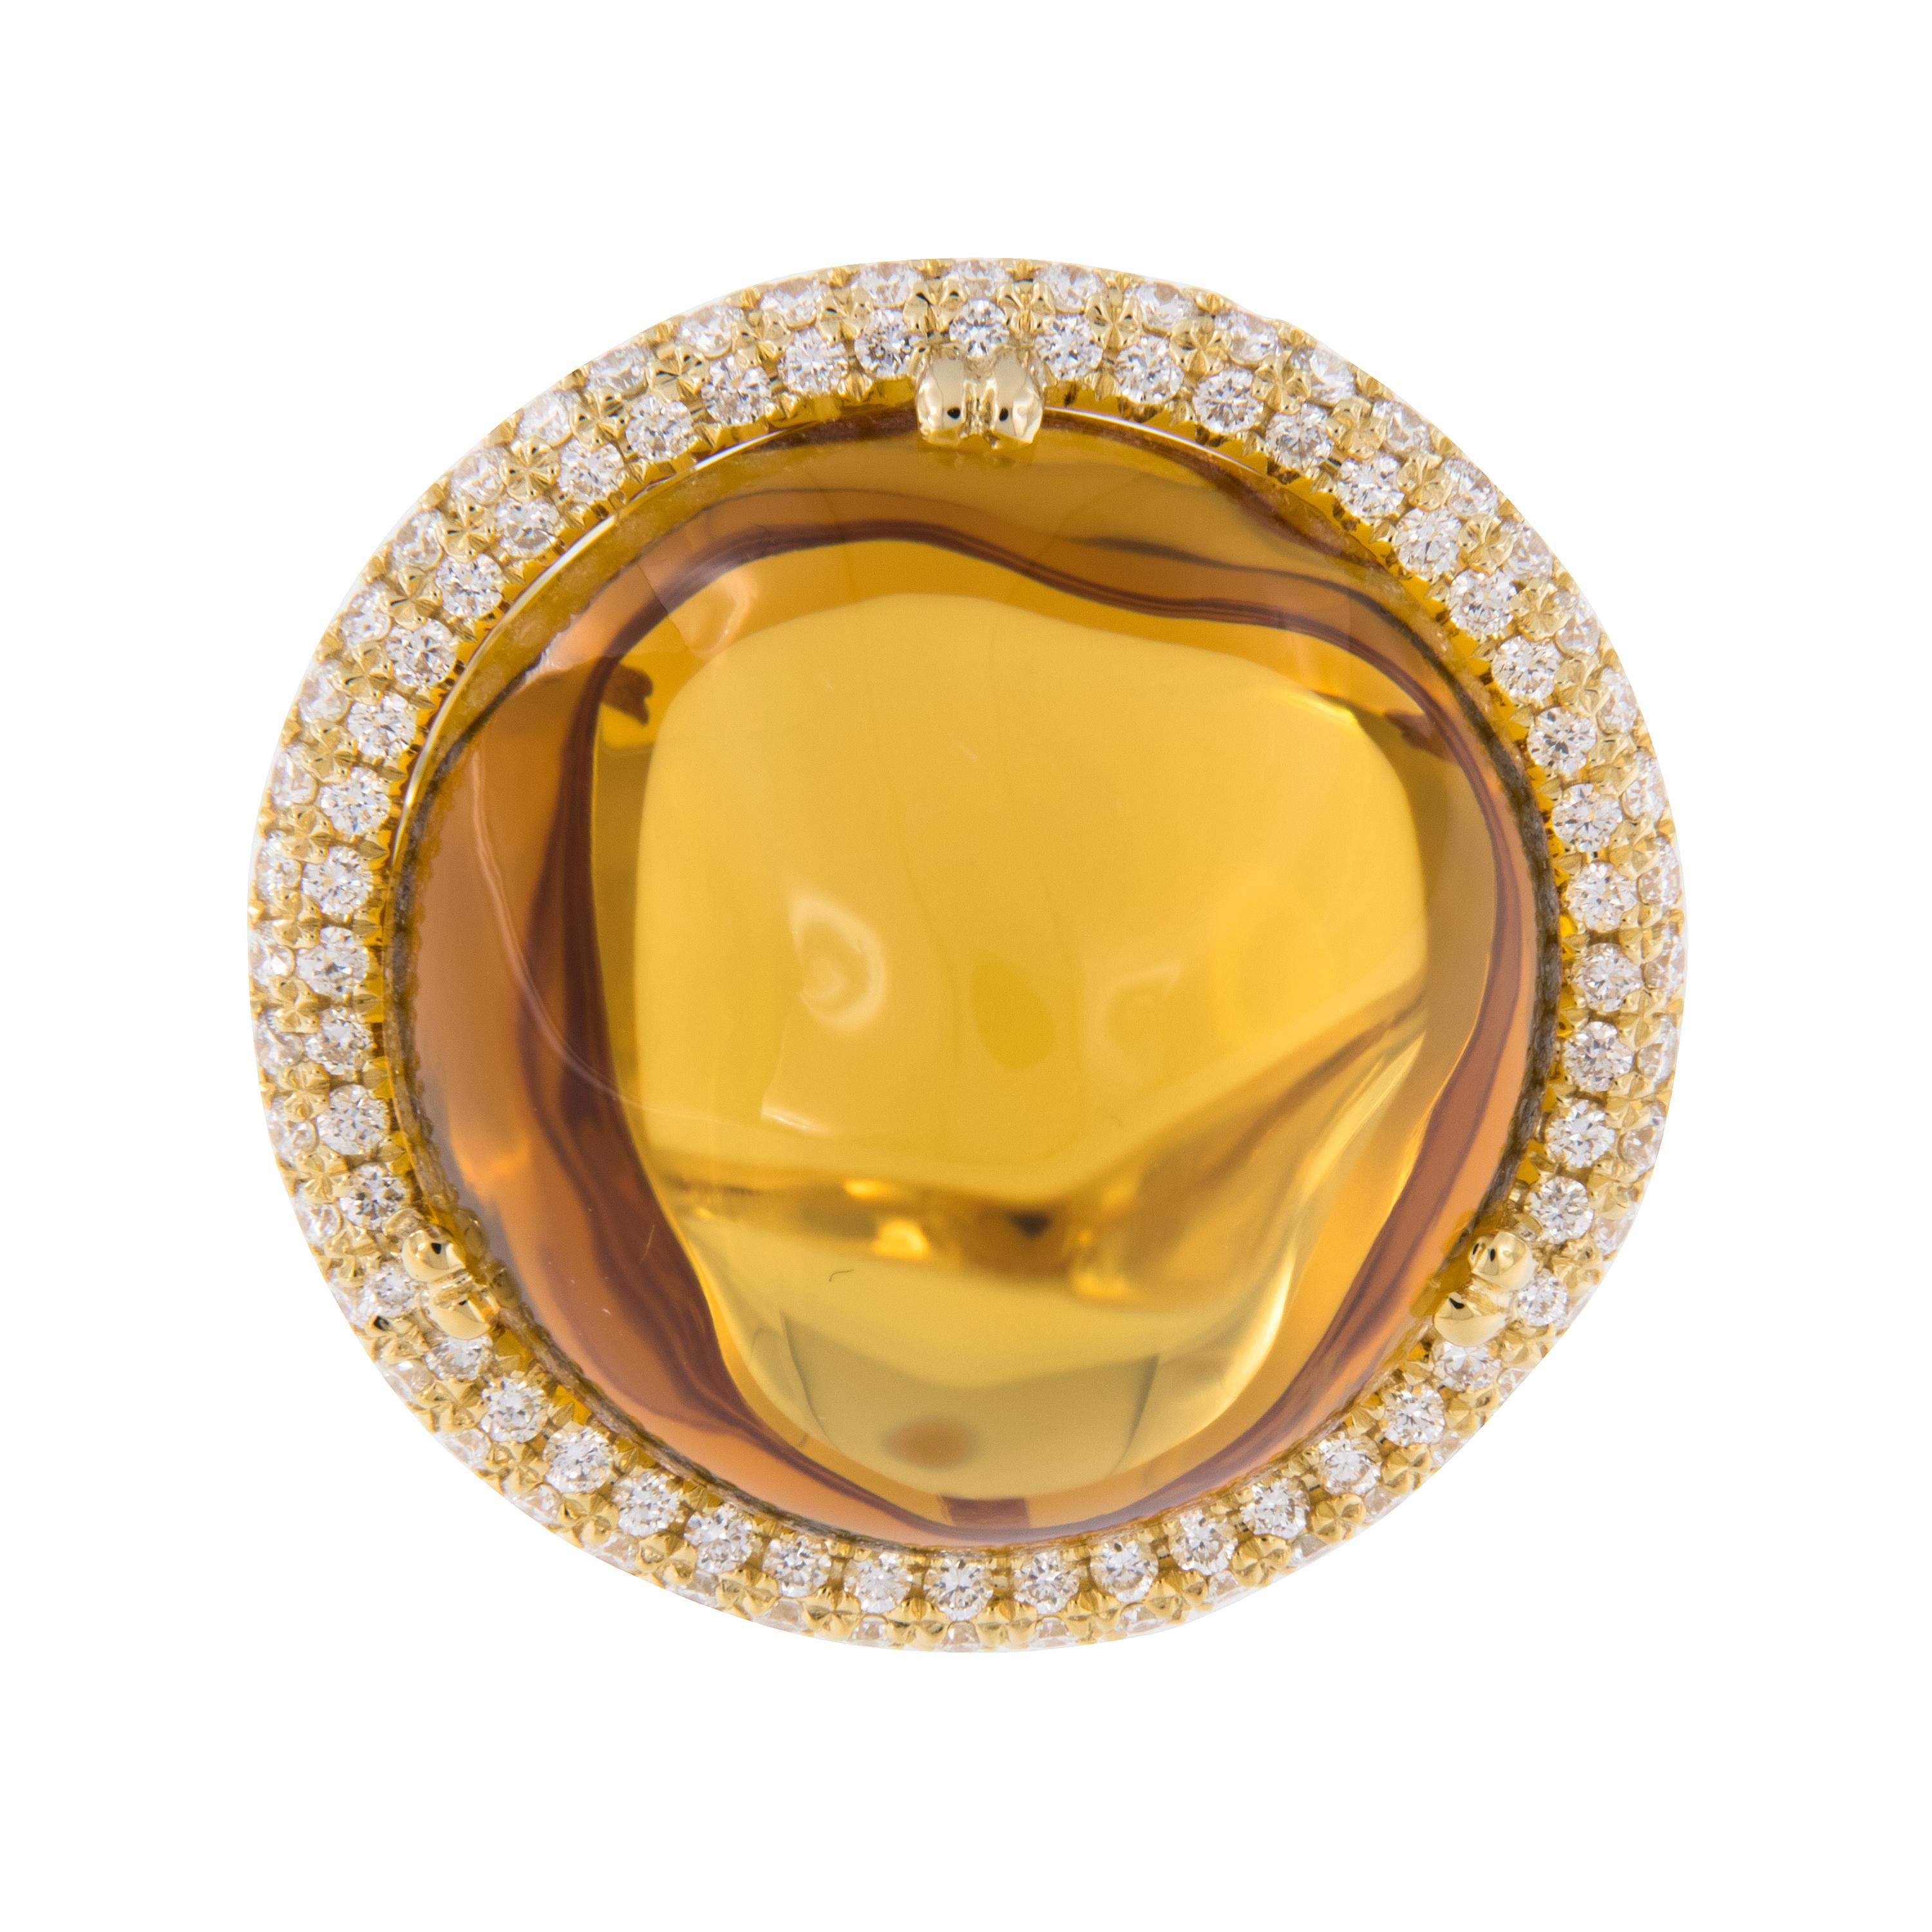 Goshwara, a term for perfect shape, is a company known for exceptional color gems and this 18 karat yellow gold Rock n Roll ring which showcases a 35.58 Carat roundish cabochon cut citrine & 0.64 Cttw diamonds shows it! Their Rock N Roll collection,